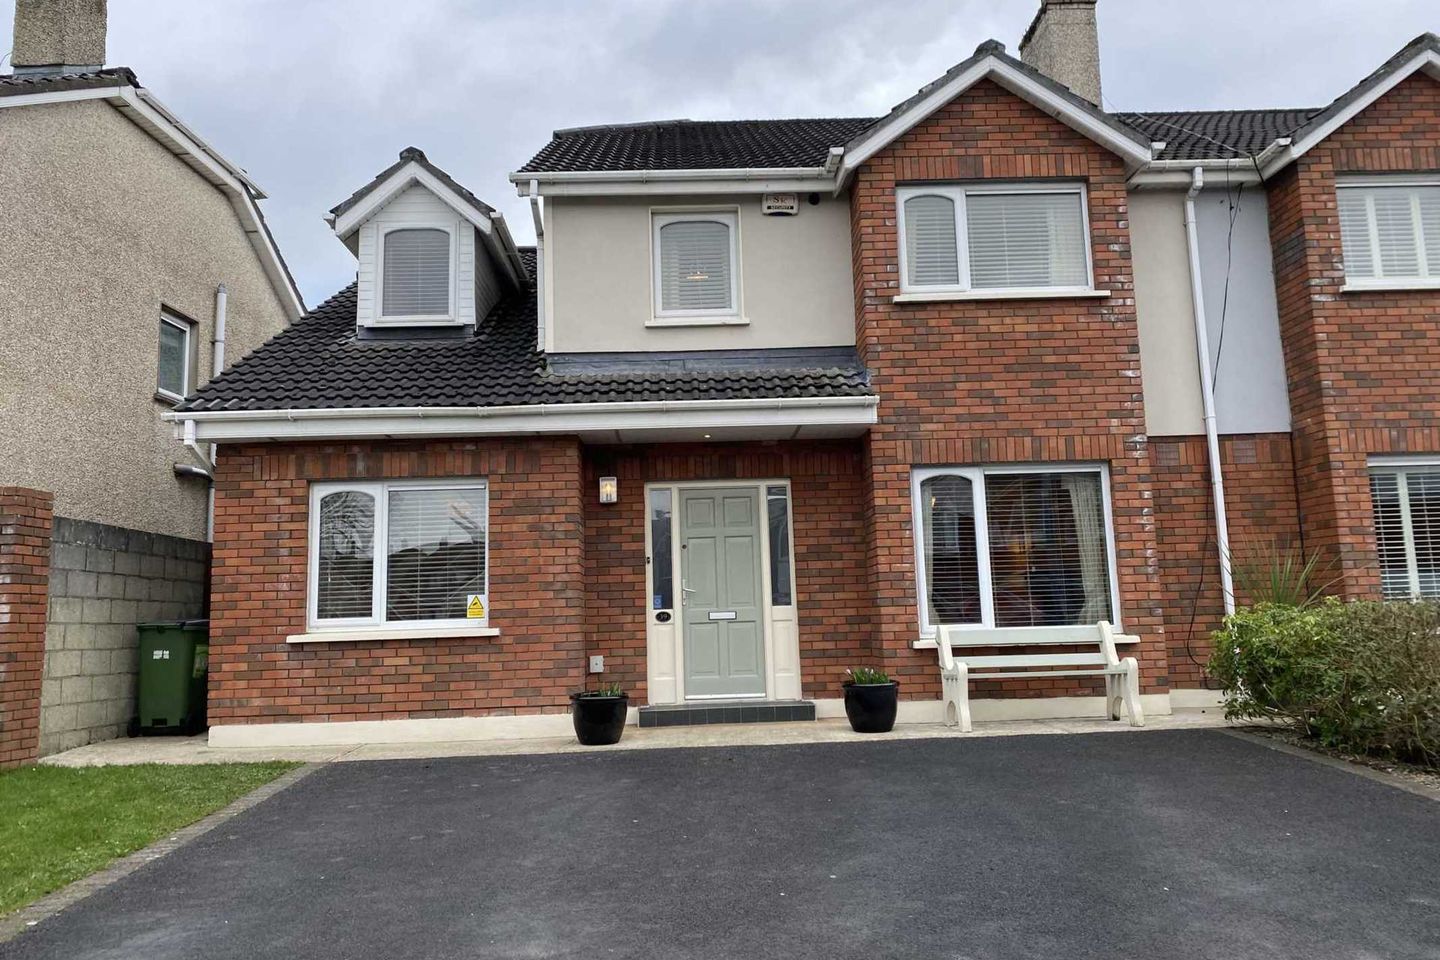 39 Inis Lua, Father Russell Road, Raheen, Dooradoyle, Co. Limerick